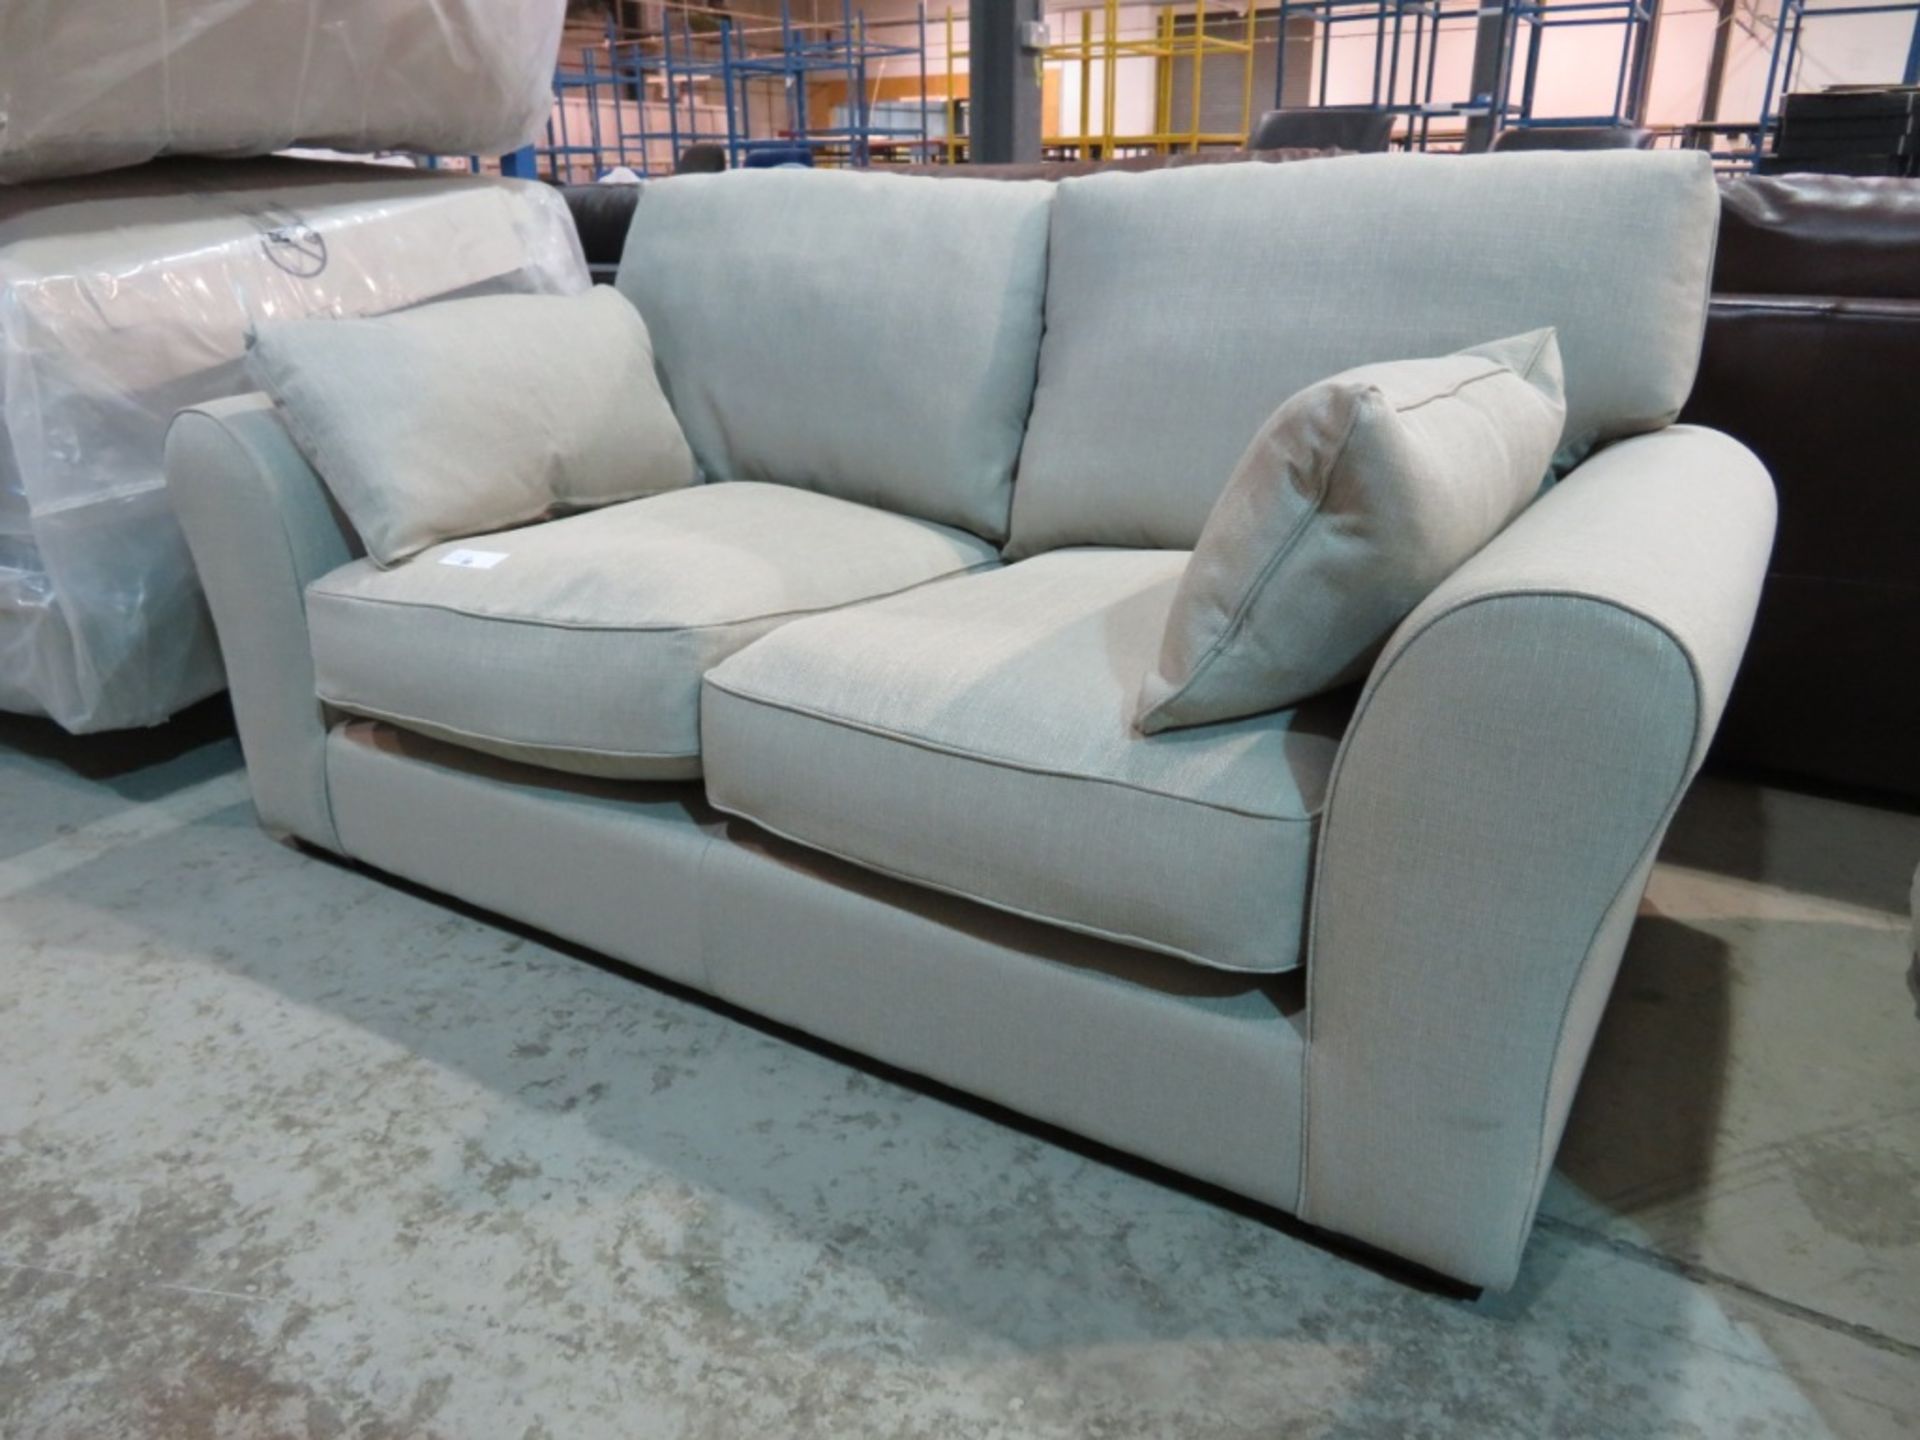 2 Seater beige sofa. New in factory wrapping - 1770 x 960mm (LxD) - Image 2 of 4